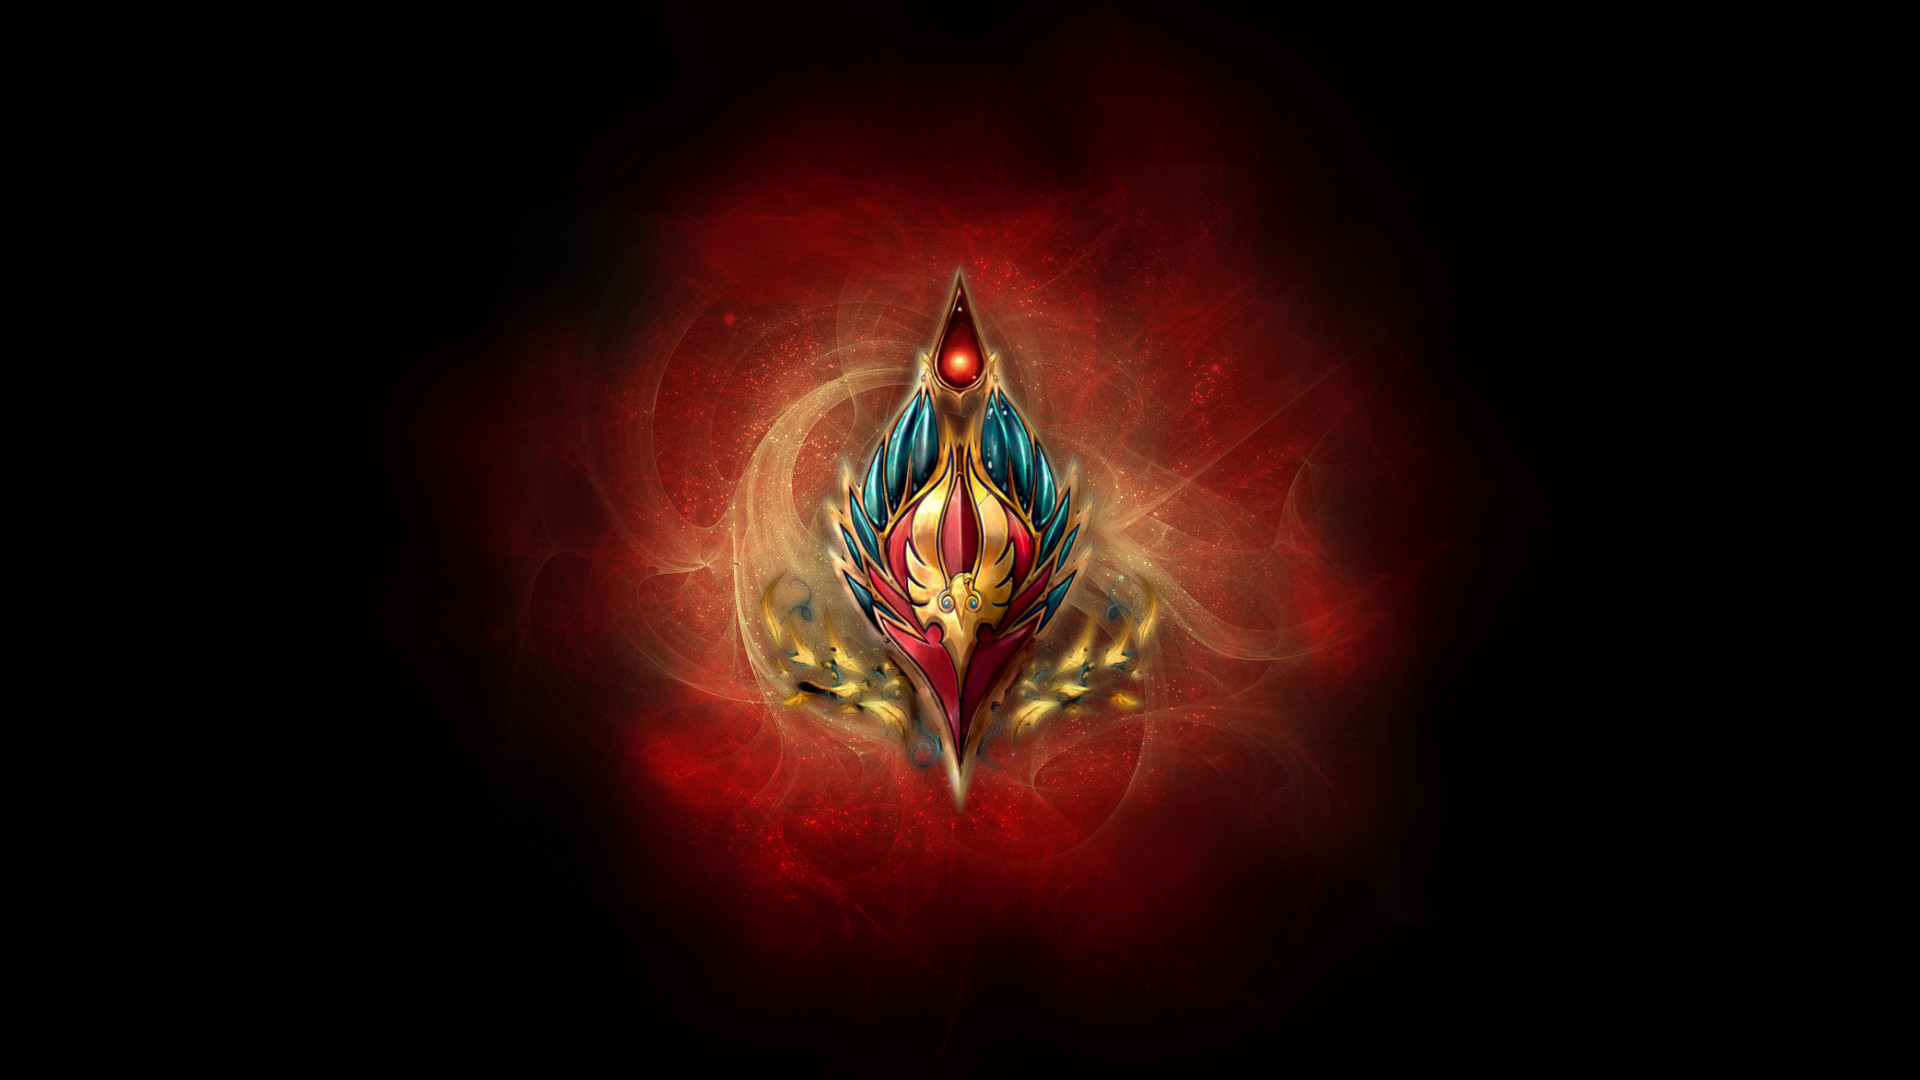 1920x1080 Blood Elf Insignia Wallpaper by Captain205 Blood Elf Insignia Wallpaper by  Captain205